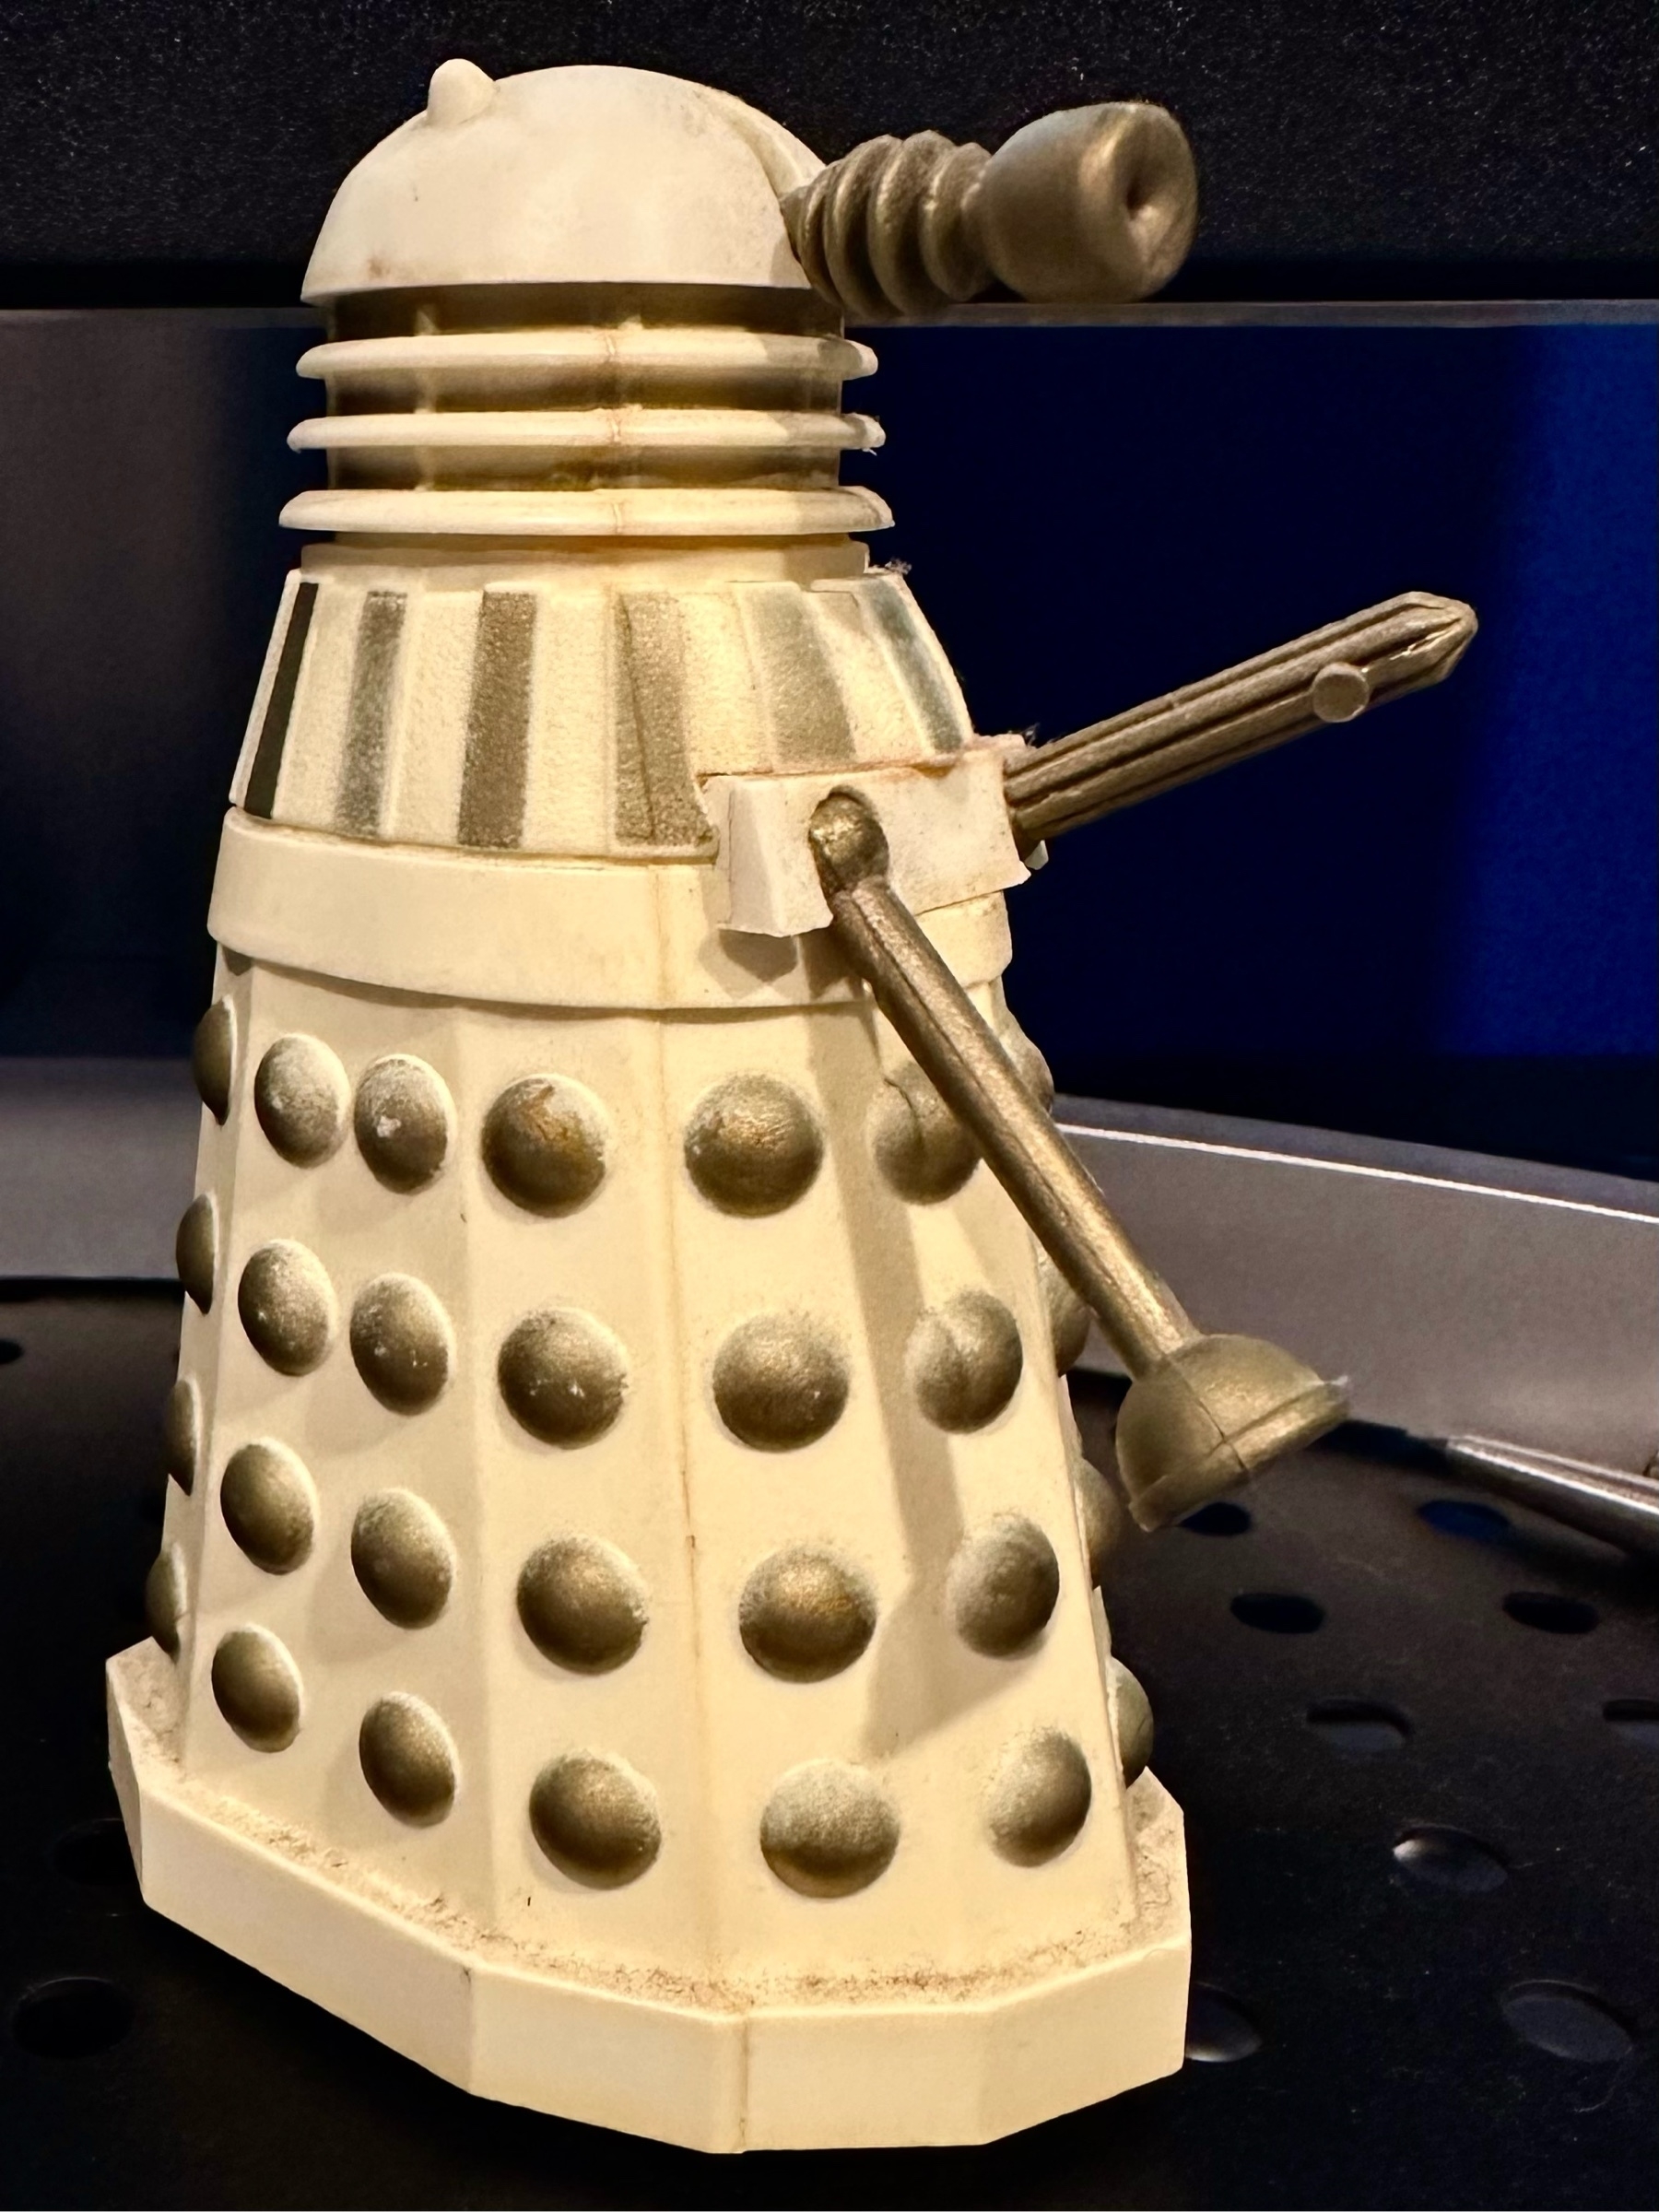 A white Dalek with gold markings from the tv show Doctor Who.